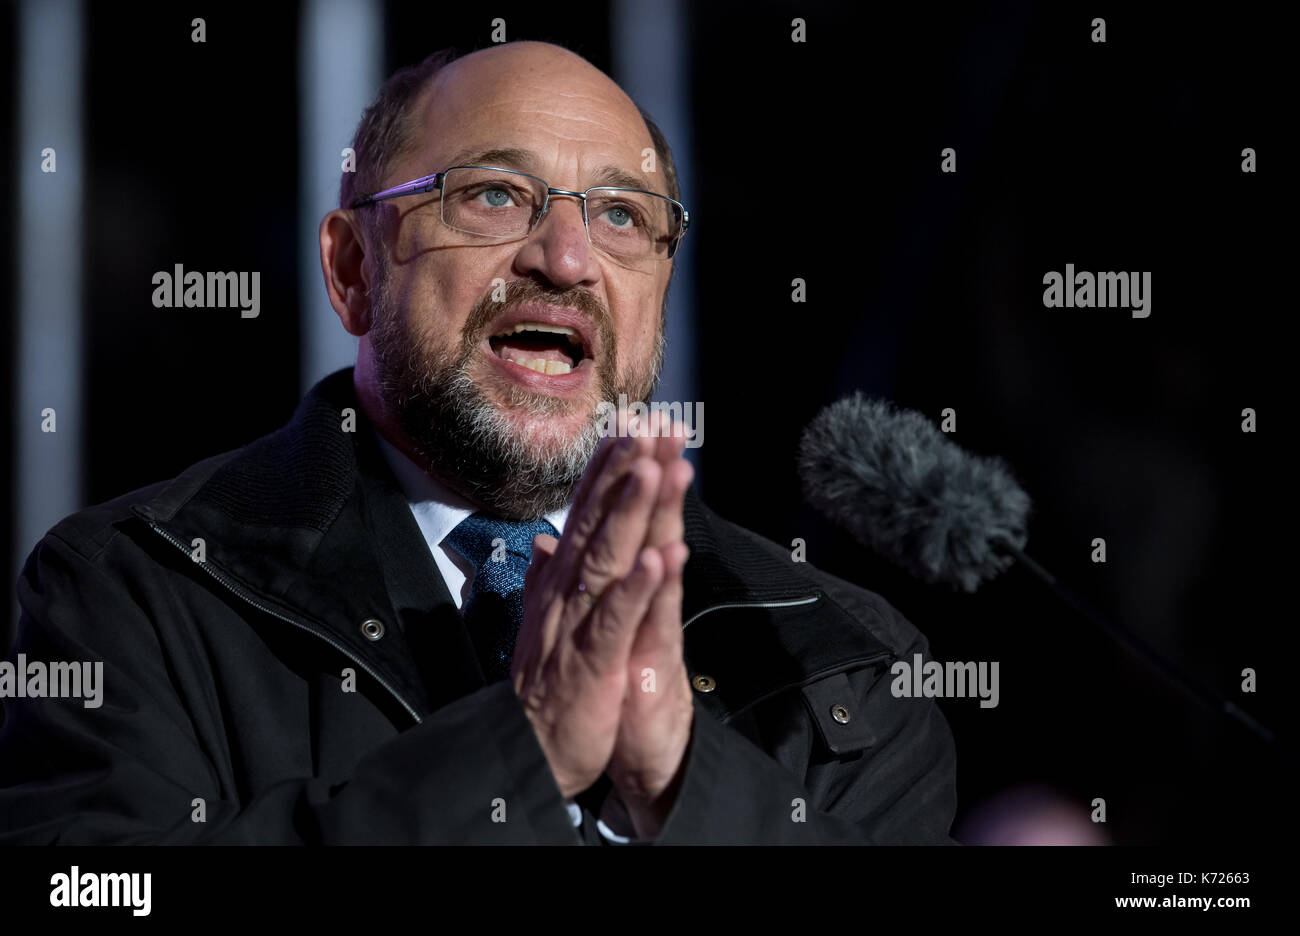 Munich, Germany. 14th Sep, 2017. Martin Schulz from the Social Democratic Party of Germany (SPD) and candidate for the German chancellorship, speaking at an election campaign event in Munich, Germany, 14 September 2017. Photo: Sven Hoppe/dpa/Alamy Live News Stock Photo